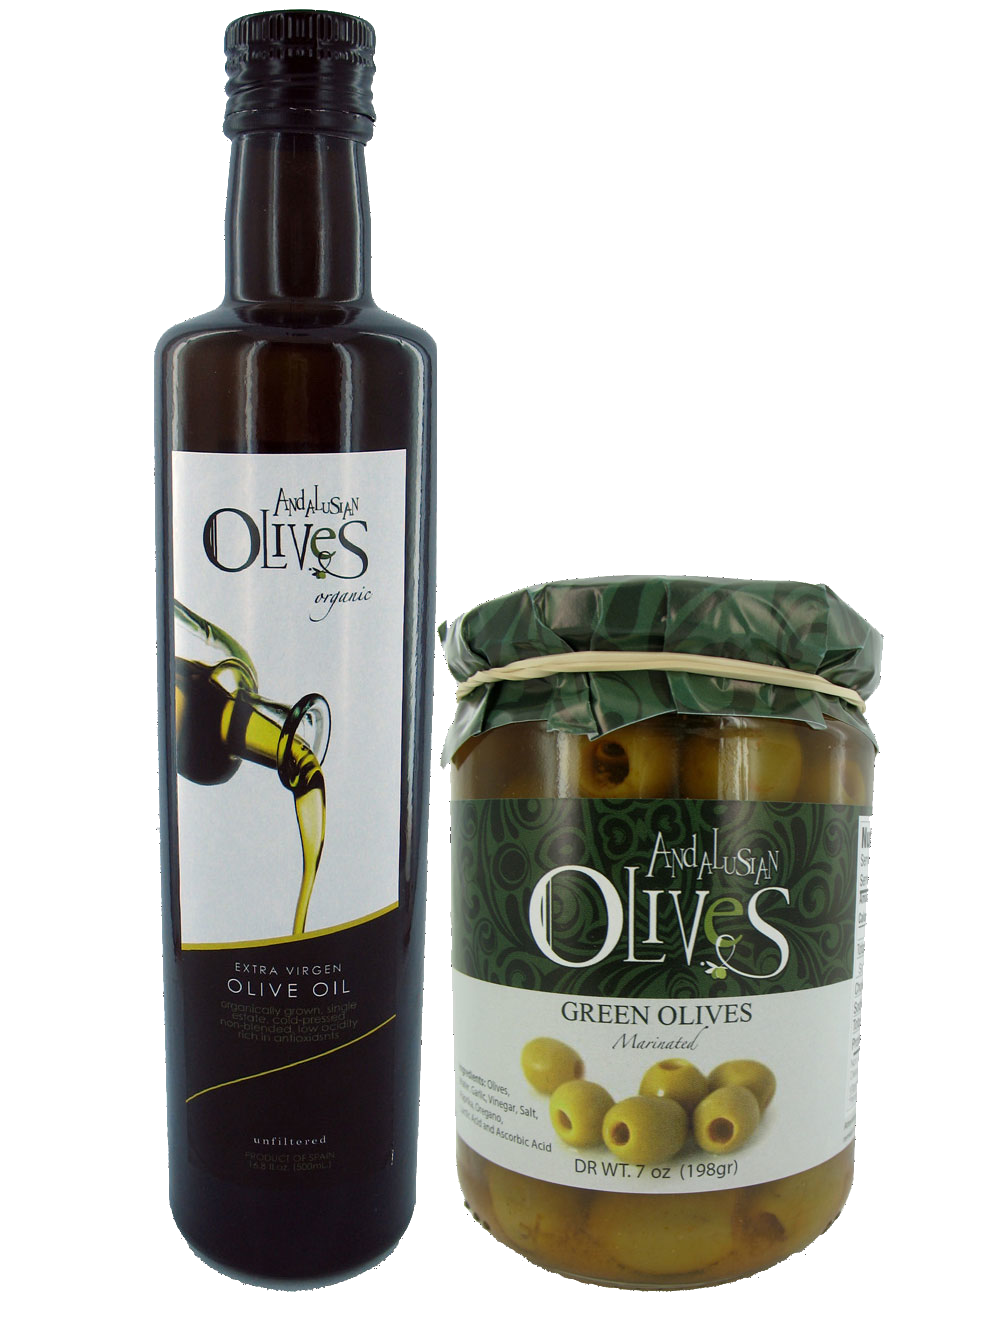 Andalusian Olives LLC